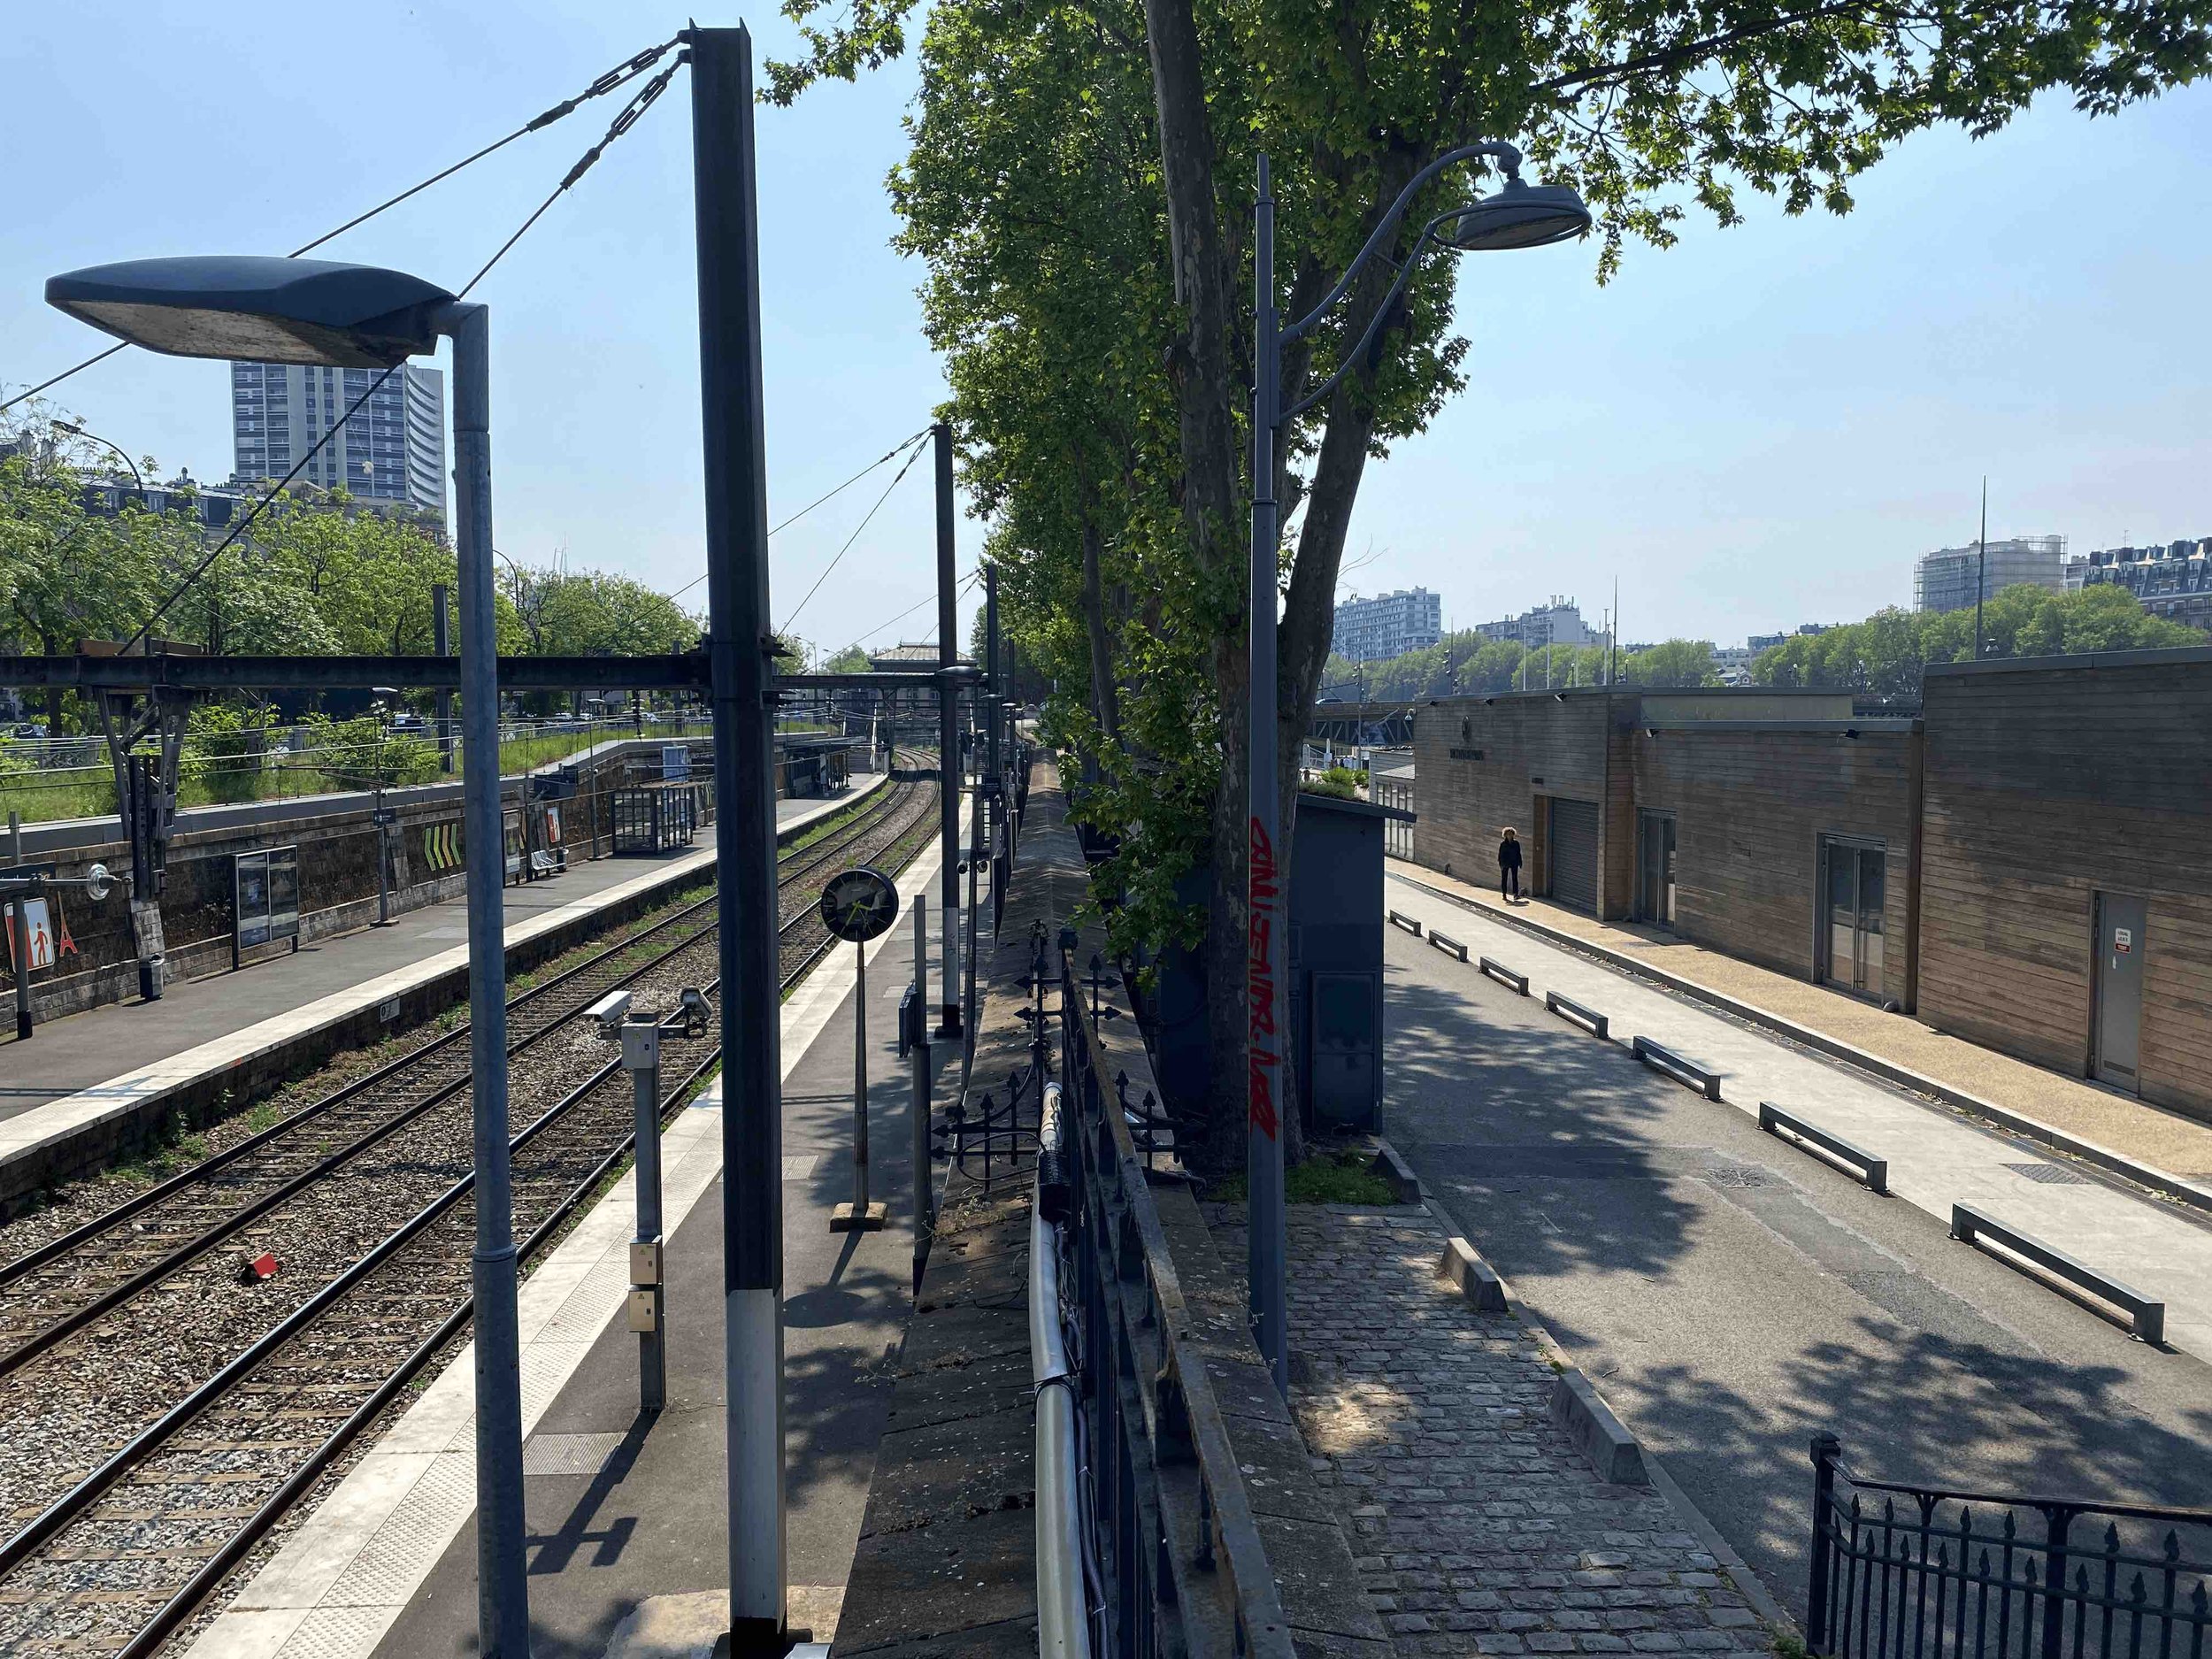  Despite the RER's position as a physical barrier between the 15th arrondissement's street movement and the riverfront, accessibility is assured through various well-designed infrastructures. Vehicular bridges with broad walkways on the sides, and pe